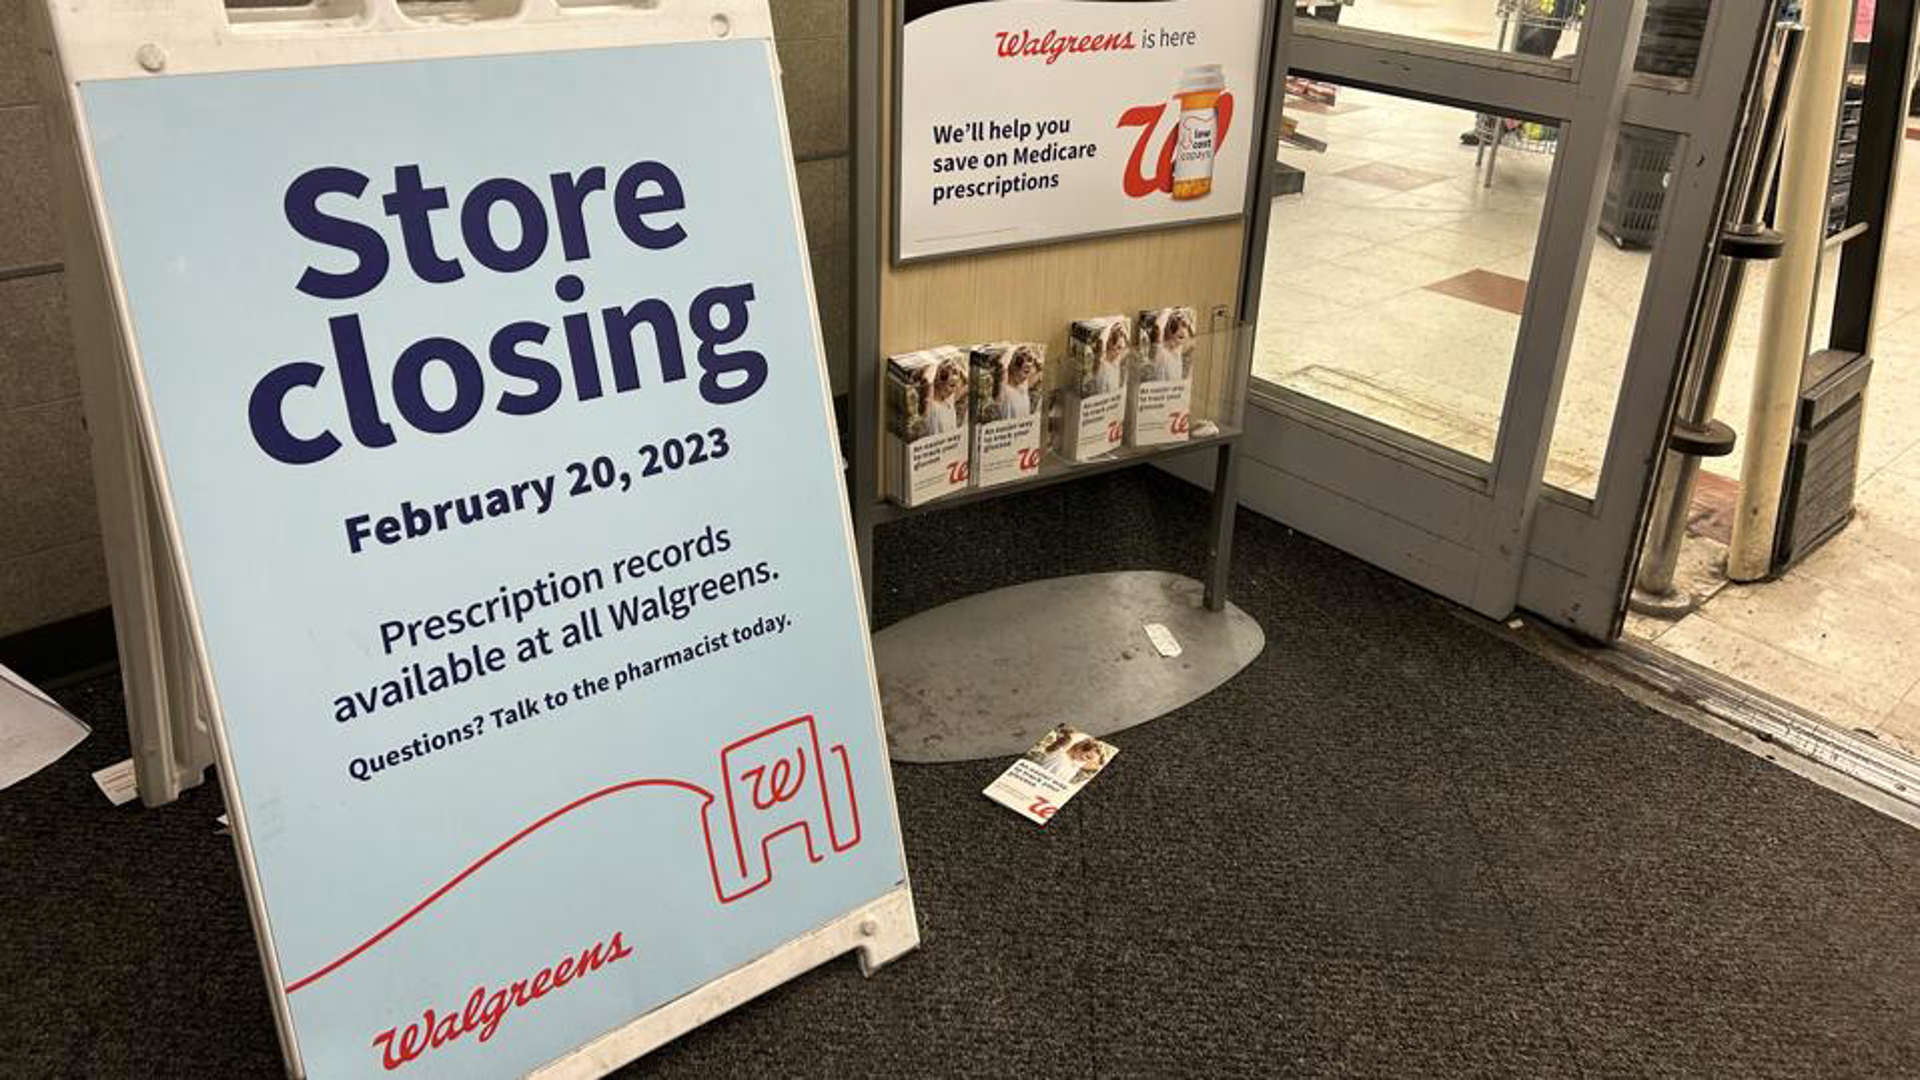 Walgreens Pharmacy and store closing sign at entrance, Queens, New York